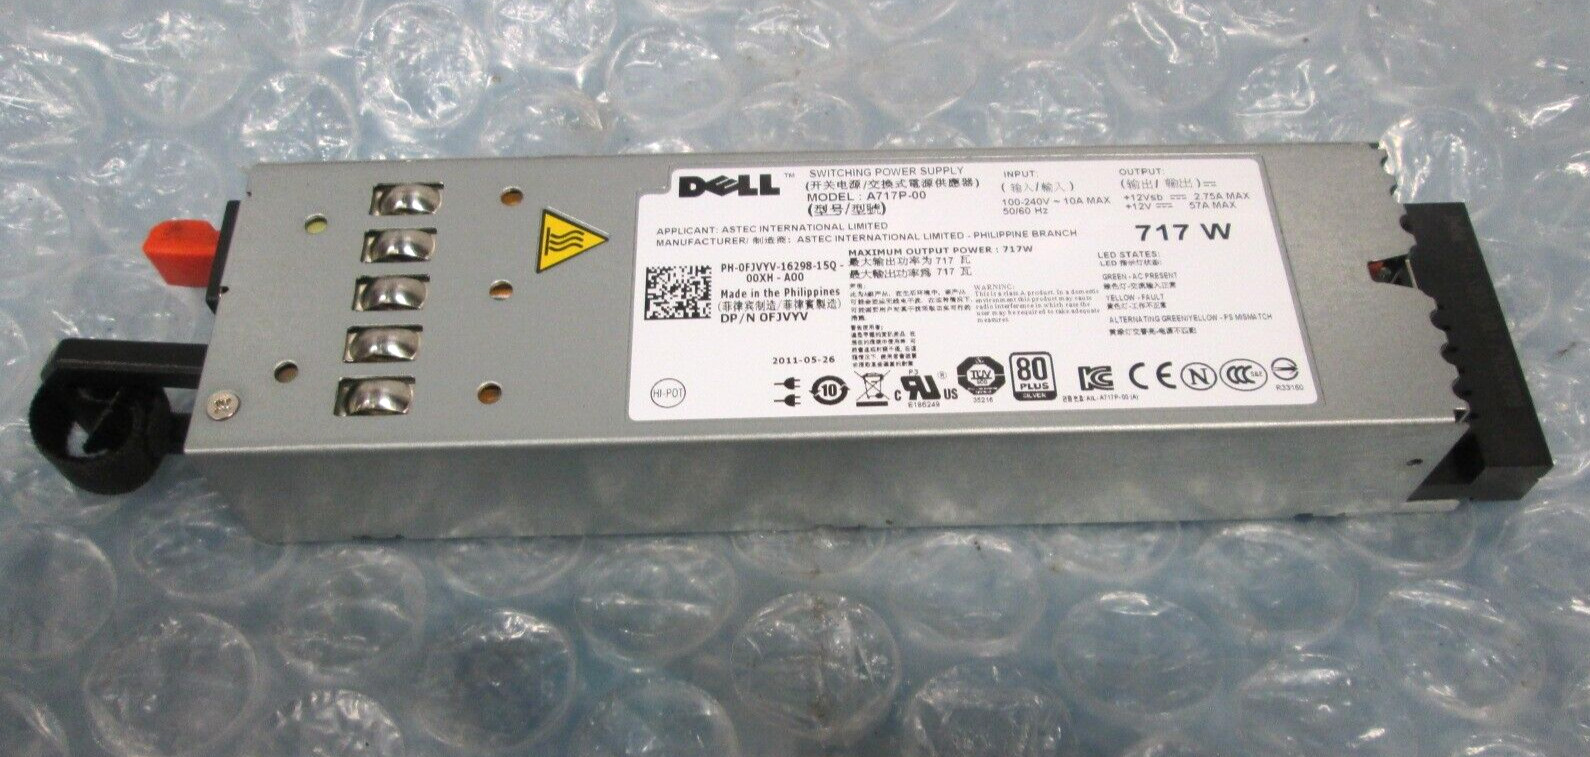 Dell A717P-00 717W Switching Power Supply For Poweredge R610 Dell P/N: 0FJVYV.